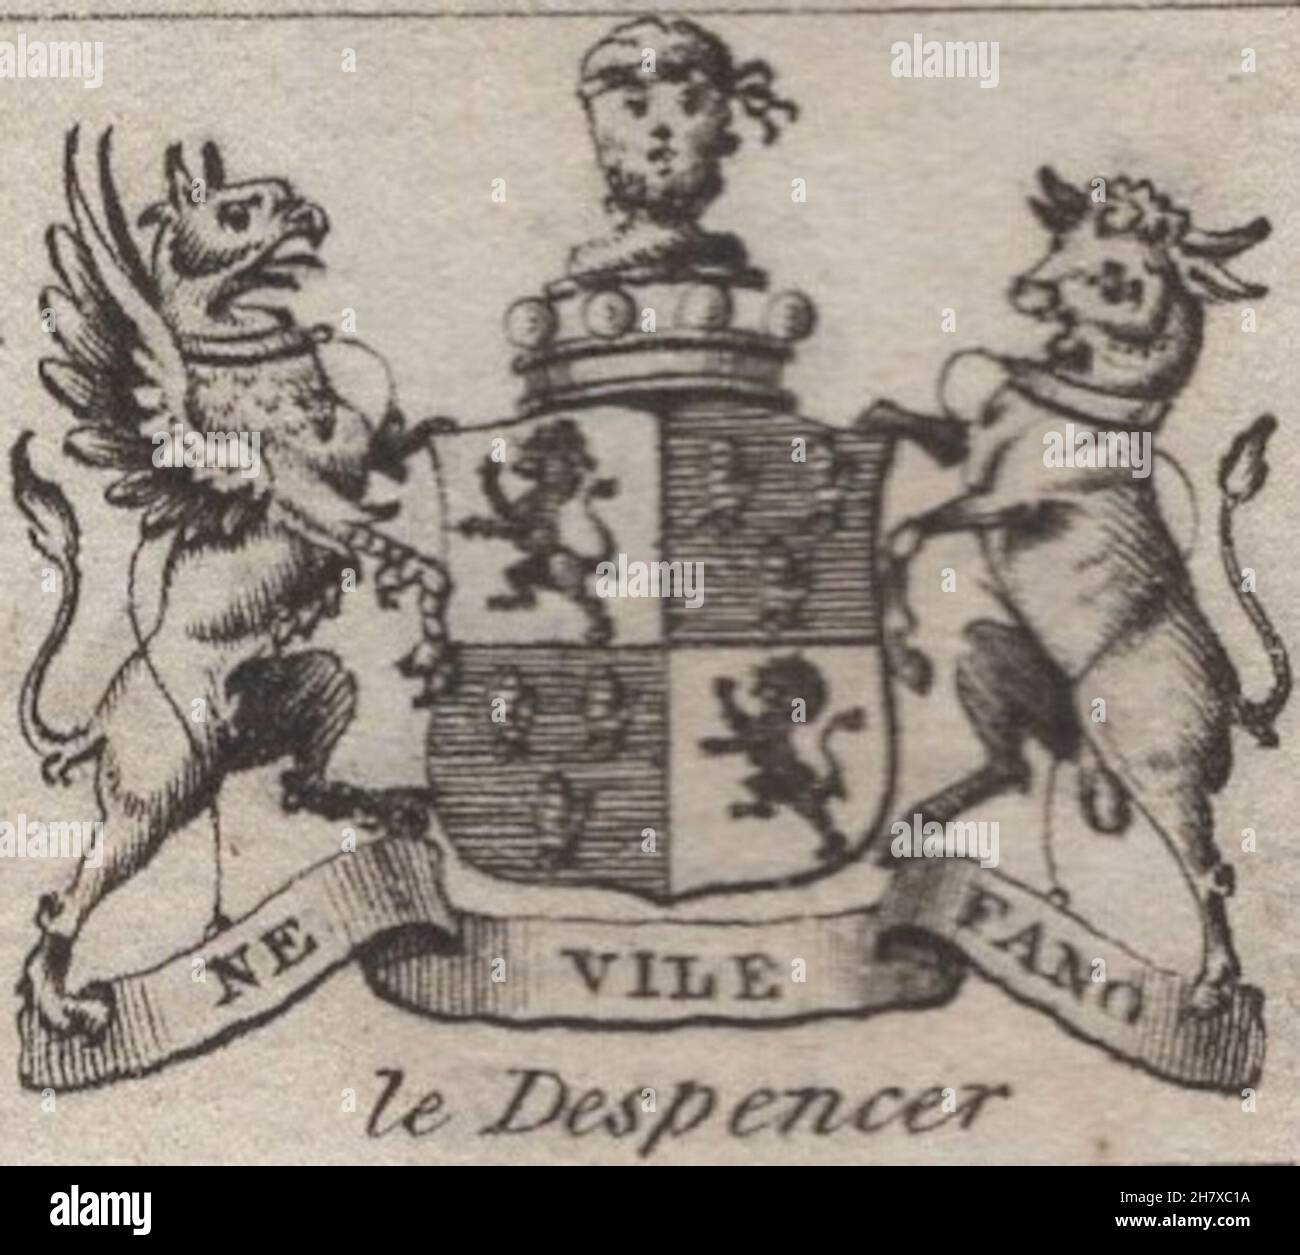 antique 18th century engraving heraldy coats of arms, English barons, Ne vile Fano, le Despencer. from Woodman & Mutlow fc russel co circa 1780s Source: original engravings from  the annual almanach book. Stock Photo